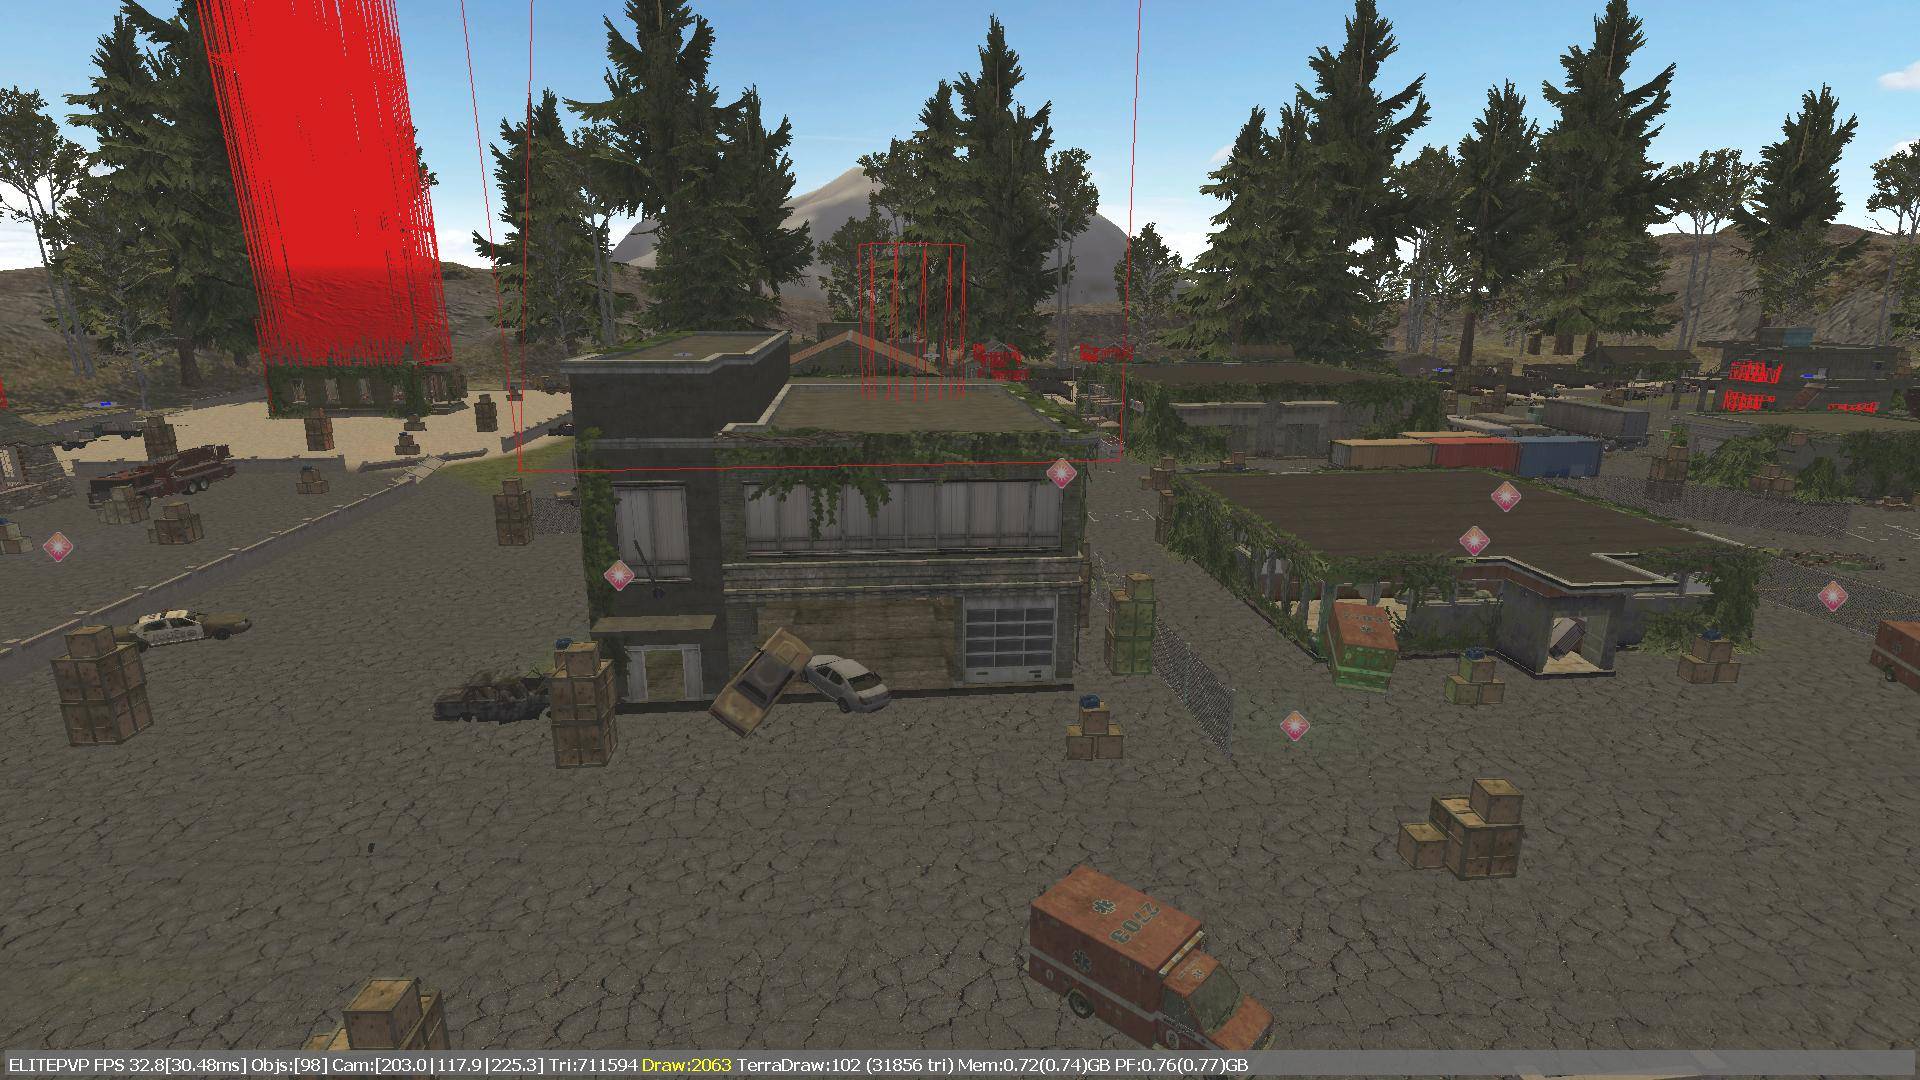 9on4ved - Come look at my map ElitePVP  *NEW* - RaGEZONE Forums